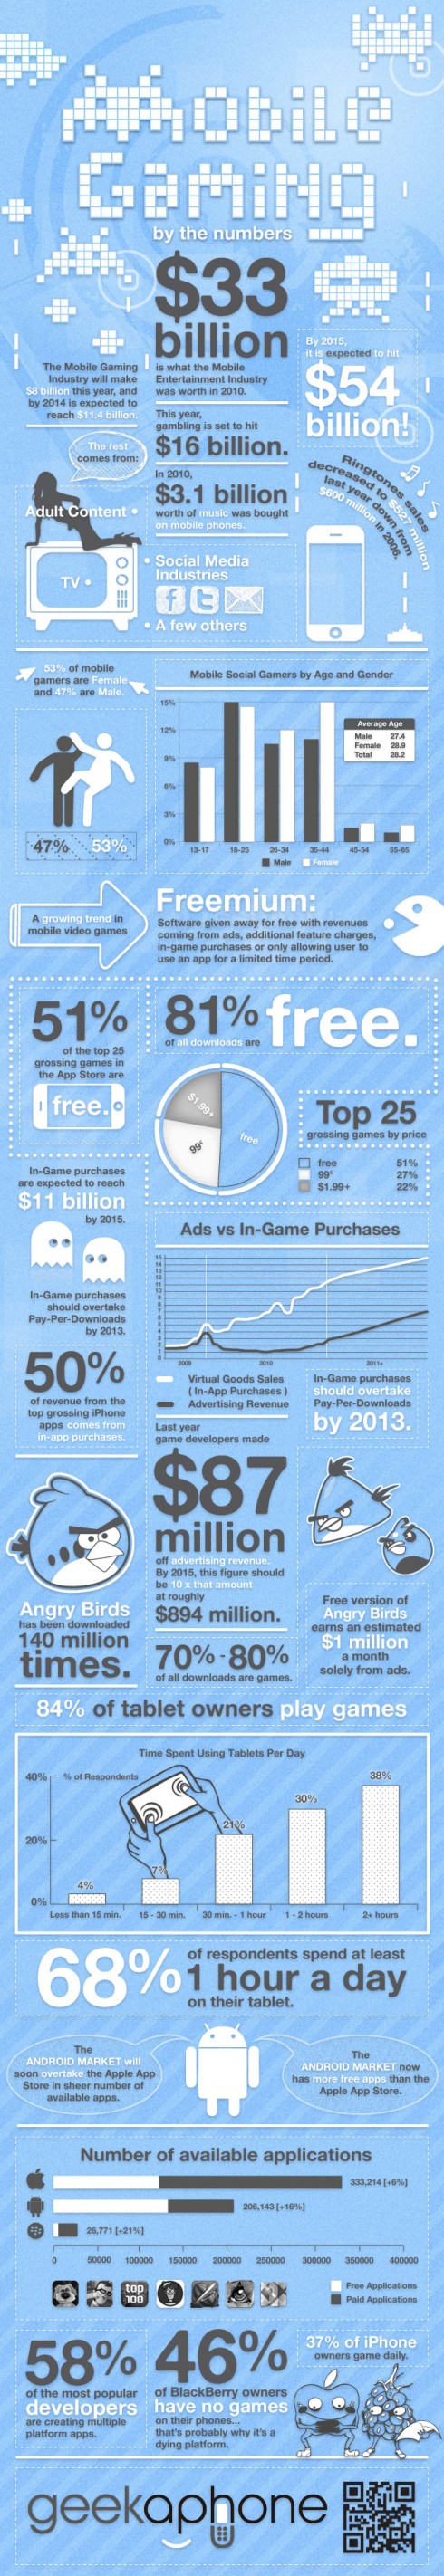 Mobile Gaming By Numbers